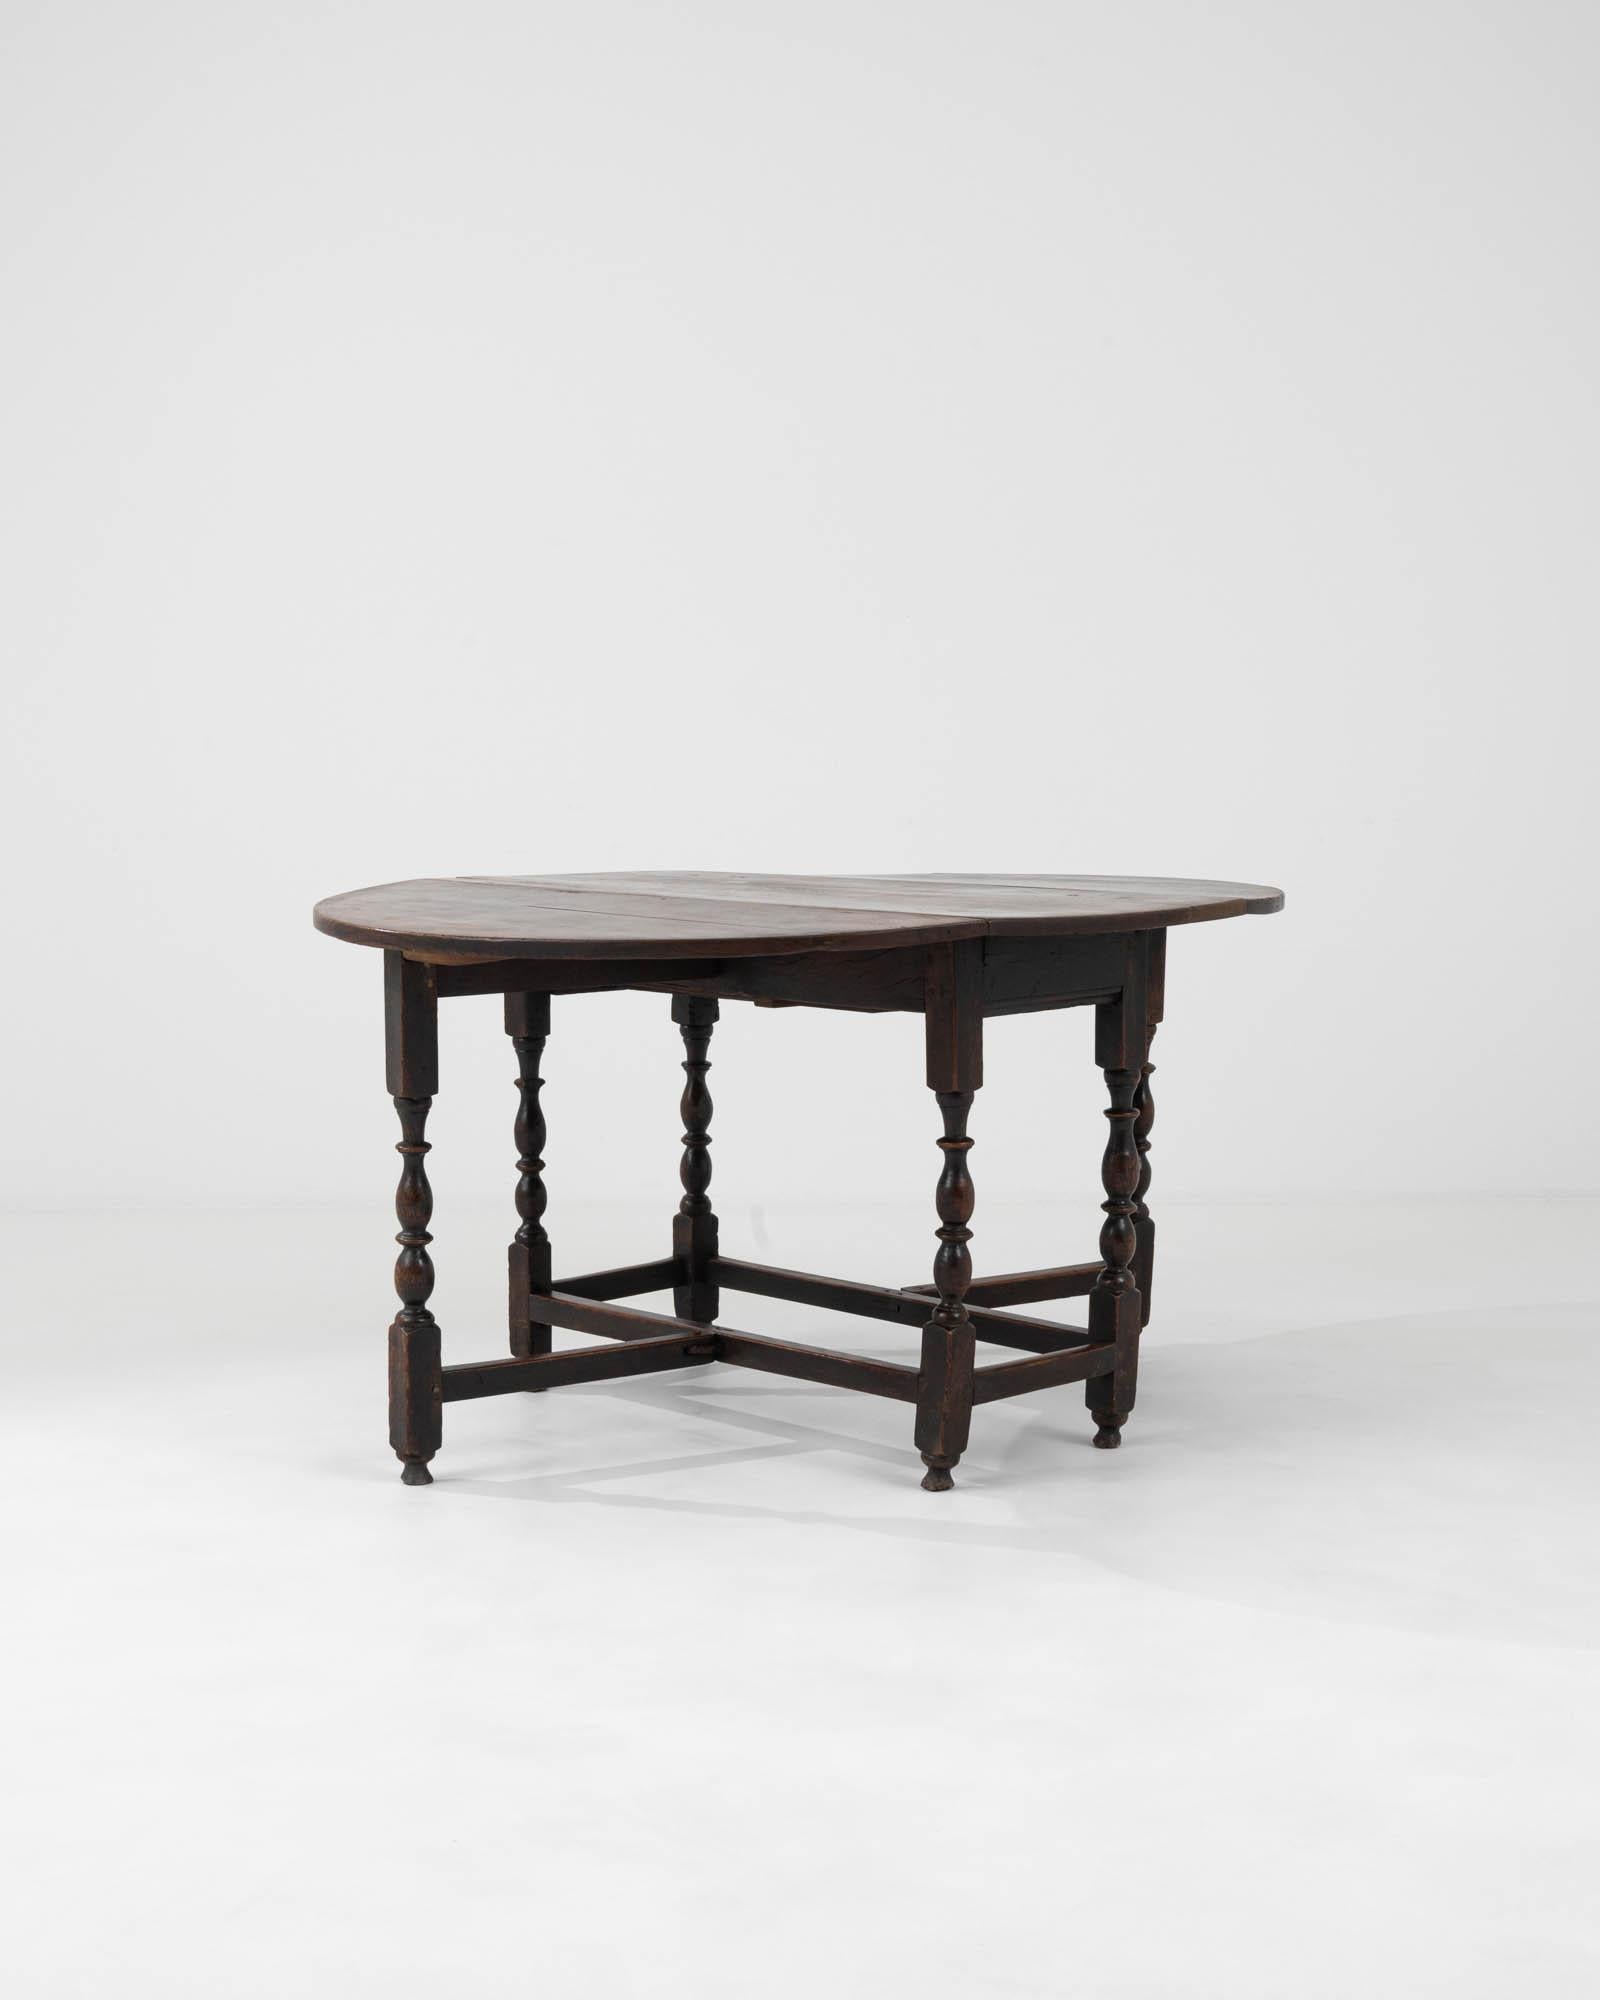 19th Century French Wooden Drop Leaf Table With Original Patina 1